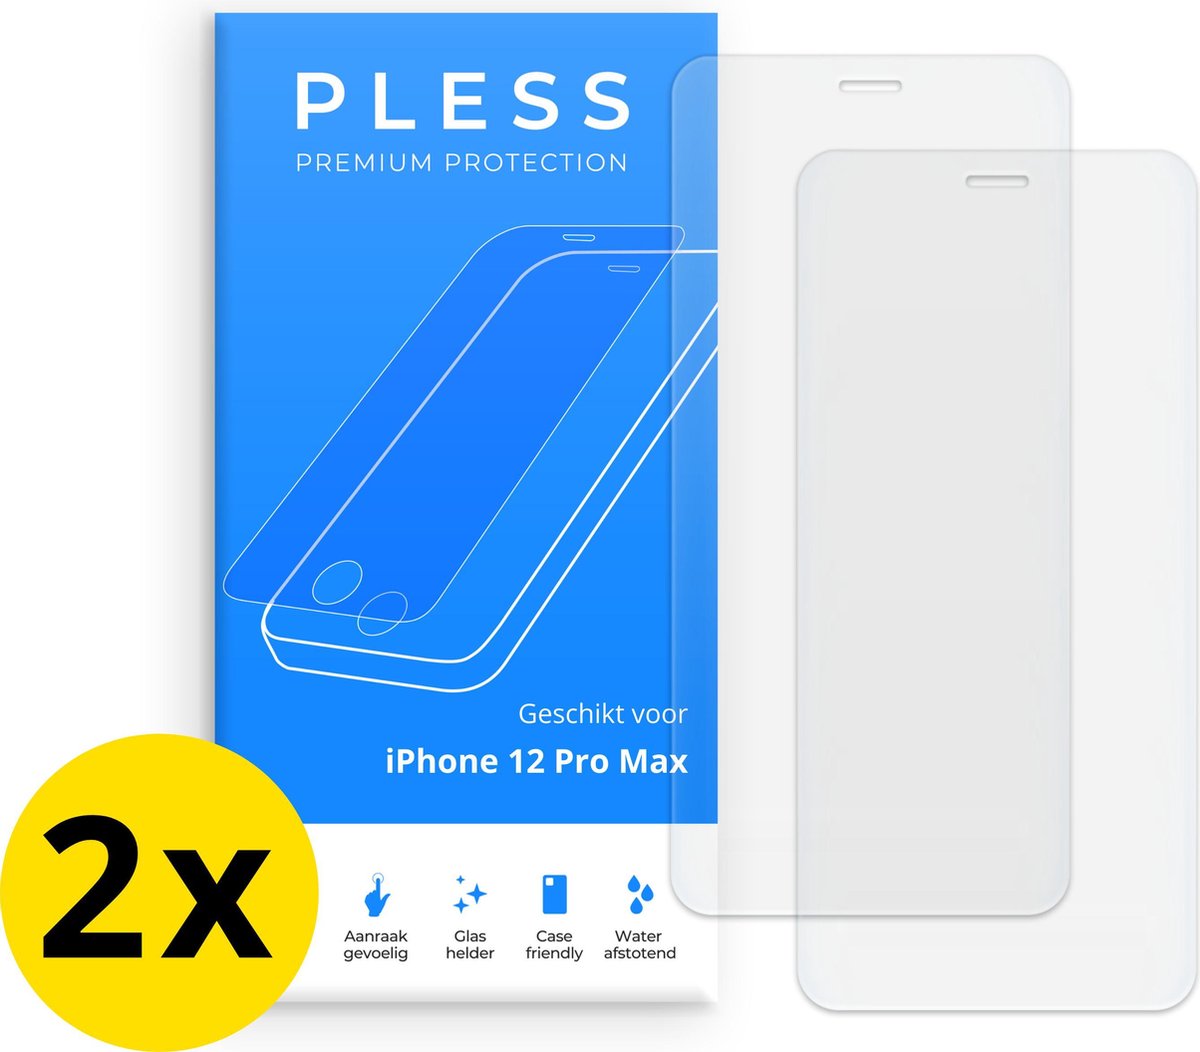 iPhone 12 Pro Max Screenprotector 2x - Beschermglas Tempered Glass Cover - Pless®